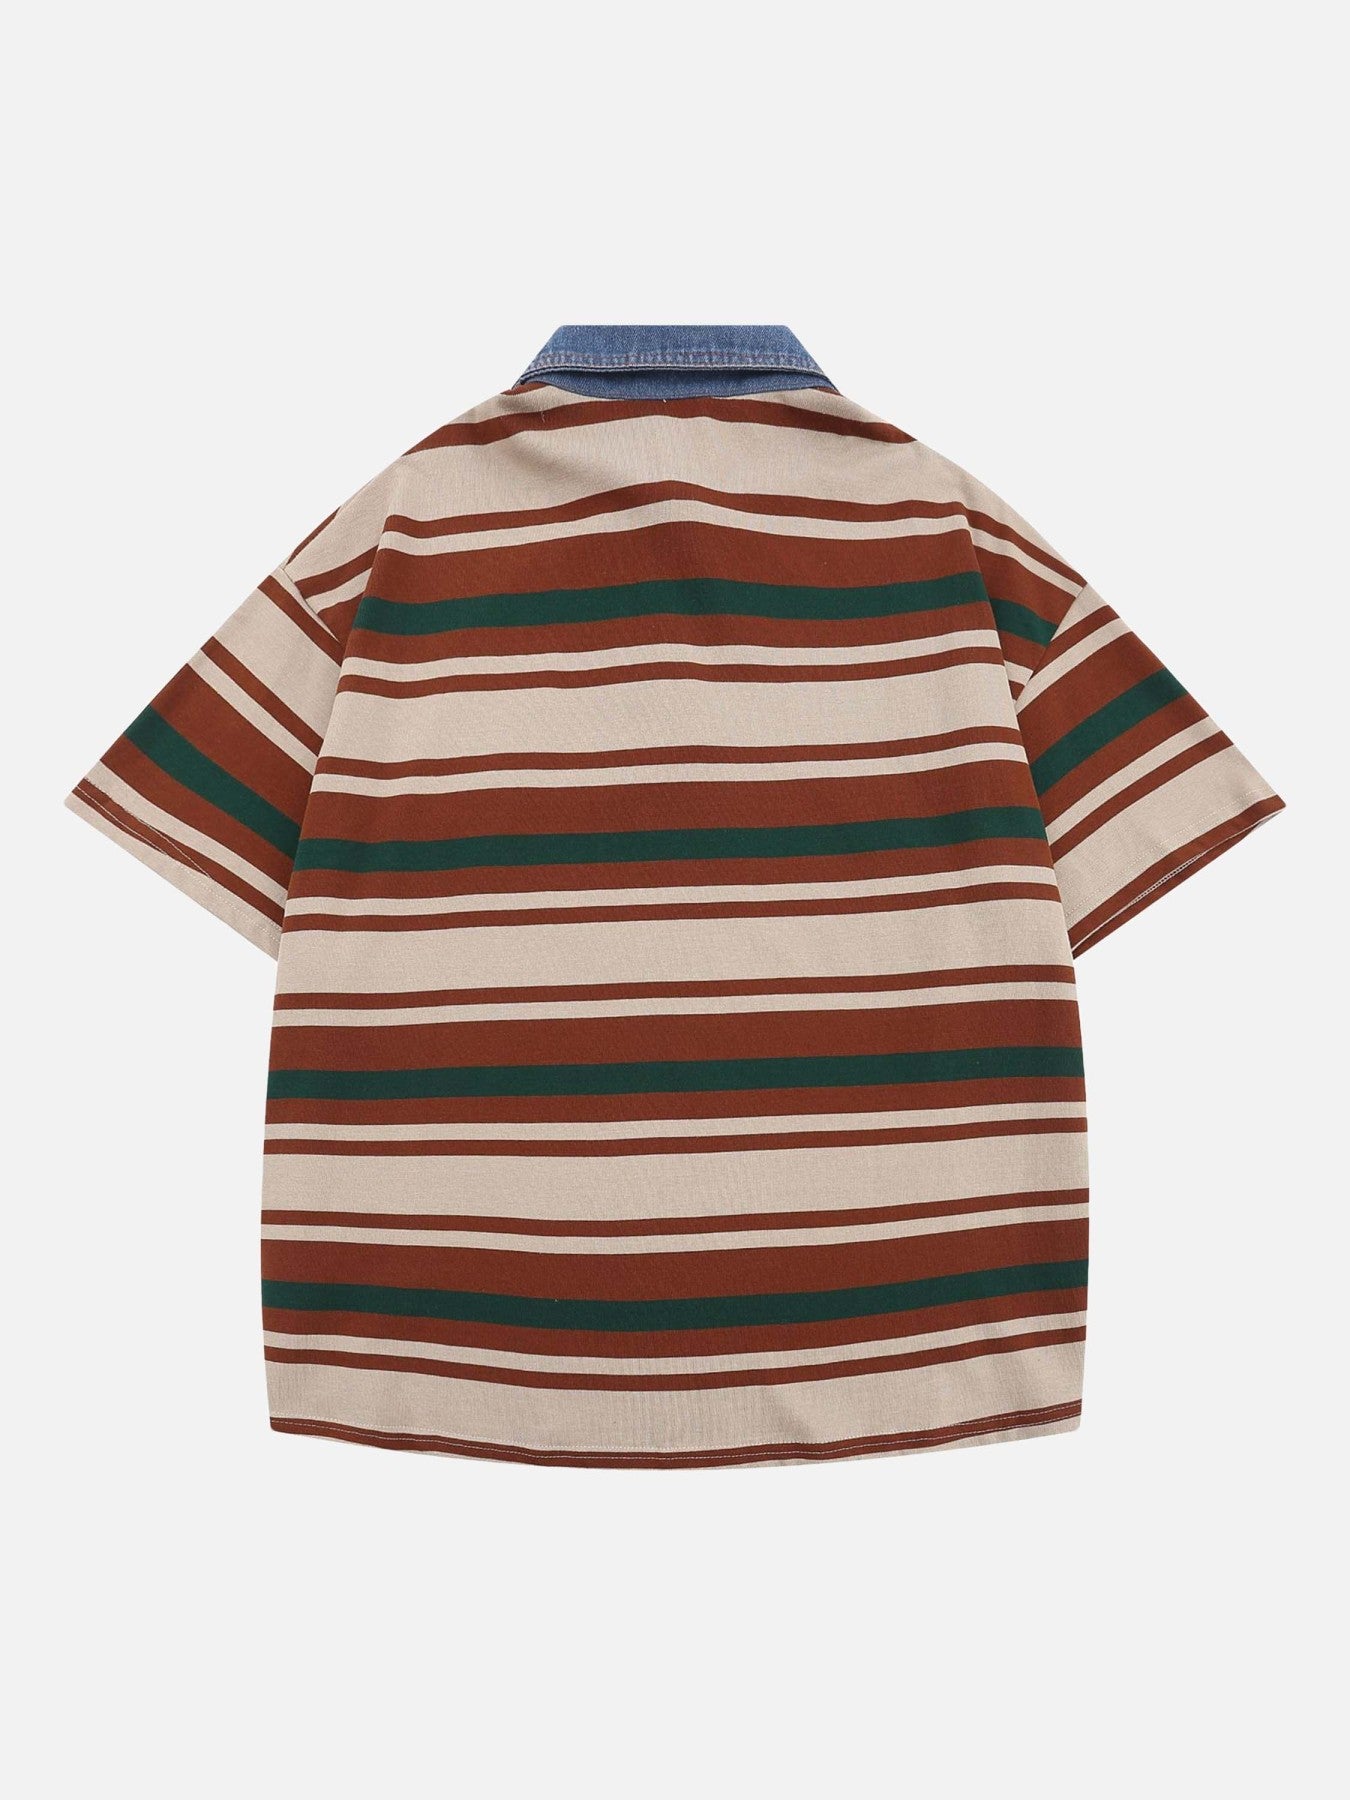 Thesupermade Vintage Striped Polo Shirt